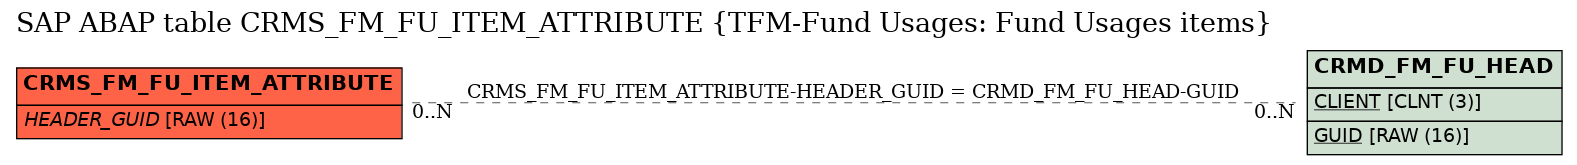 E-R Diagram for table CRMS_FM_FU_ITEM_ATTRIBUTE (TFM-Fund Usages: Fund Usages items)